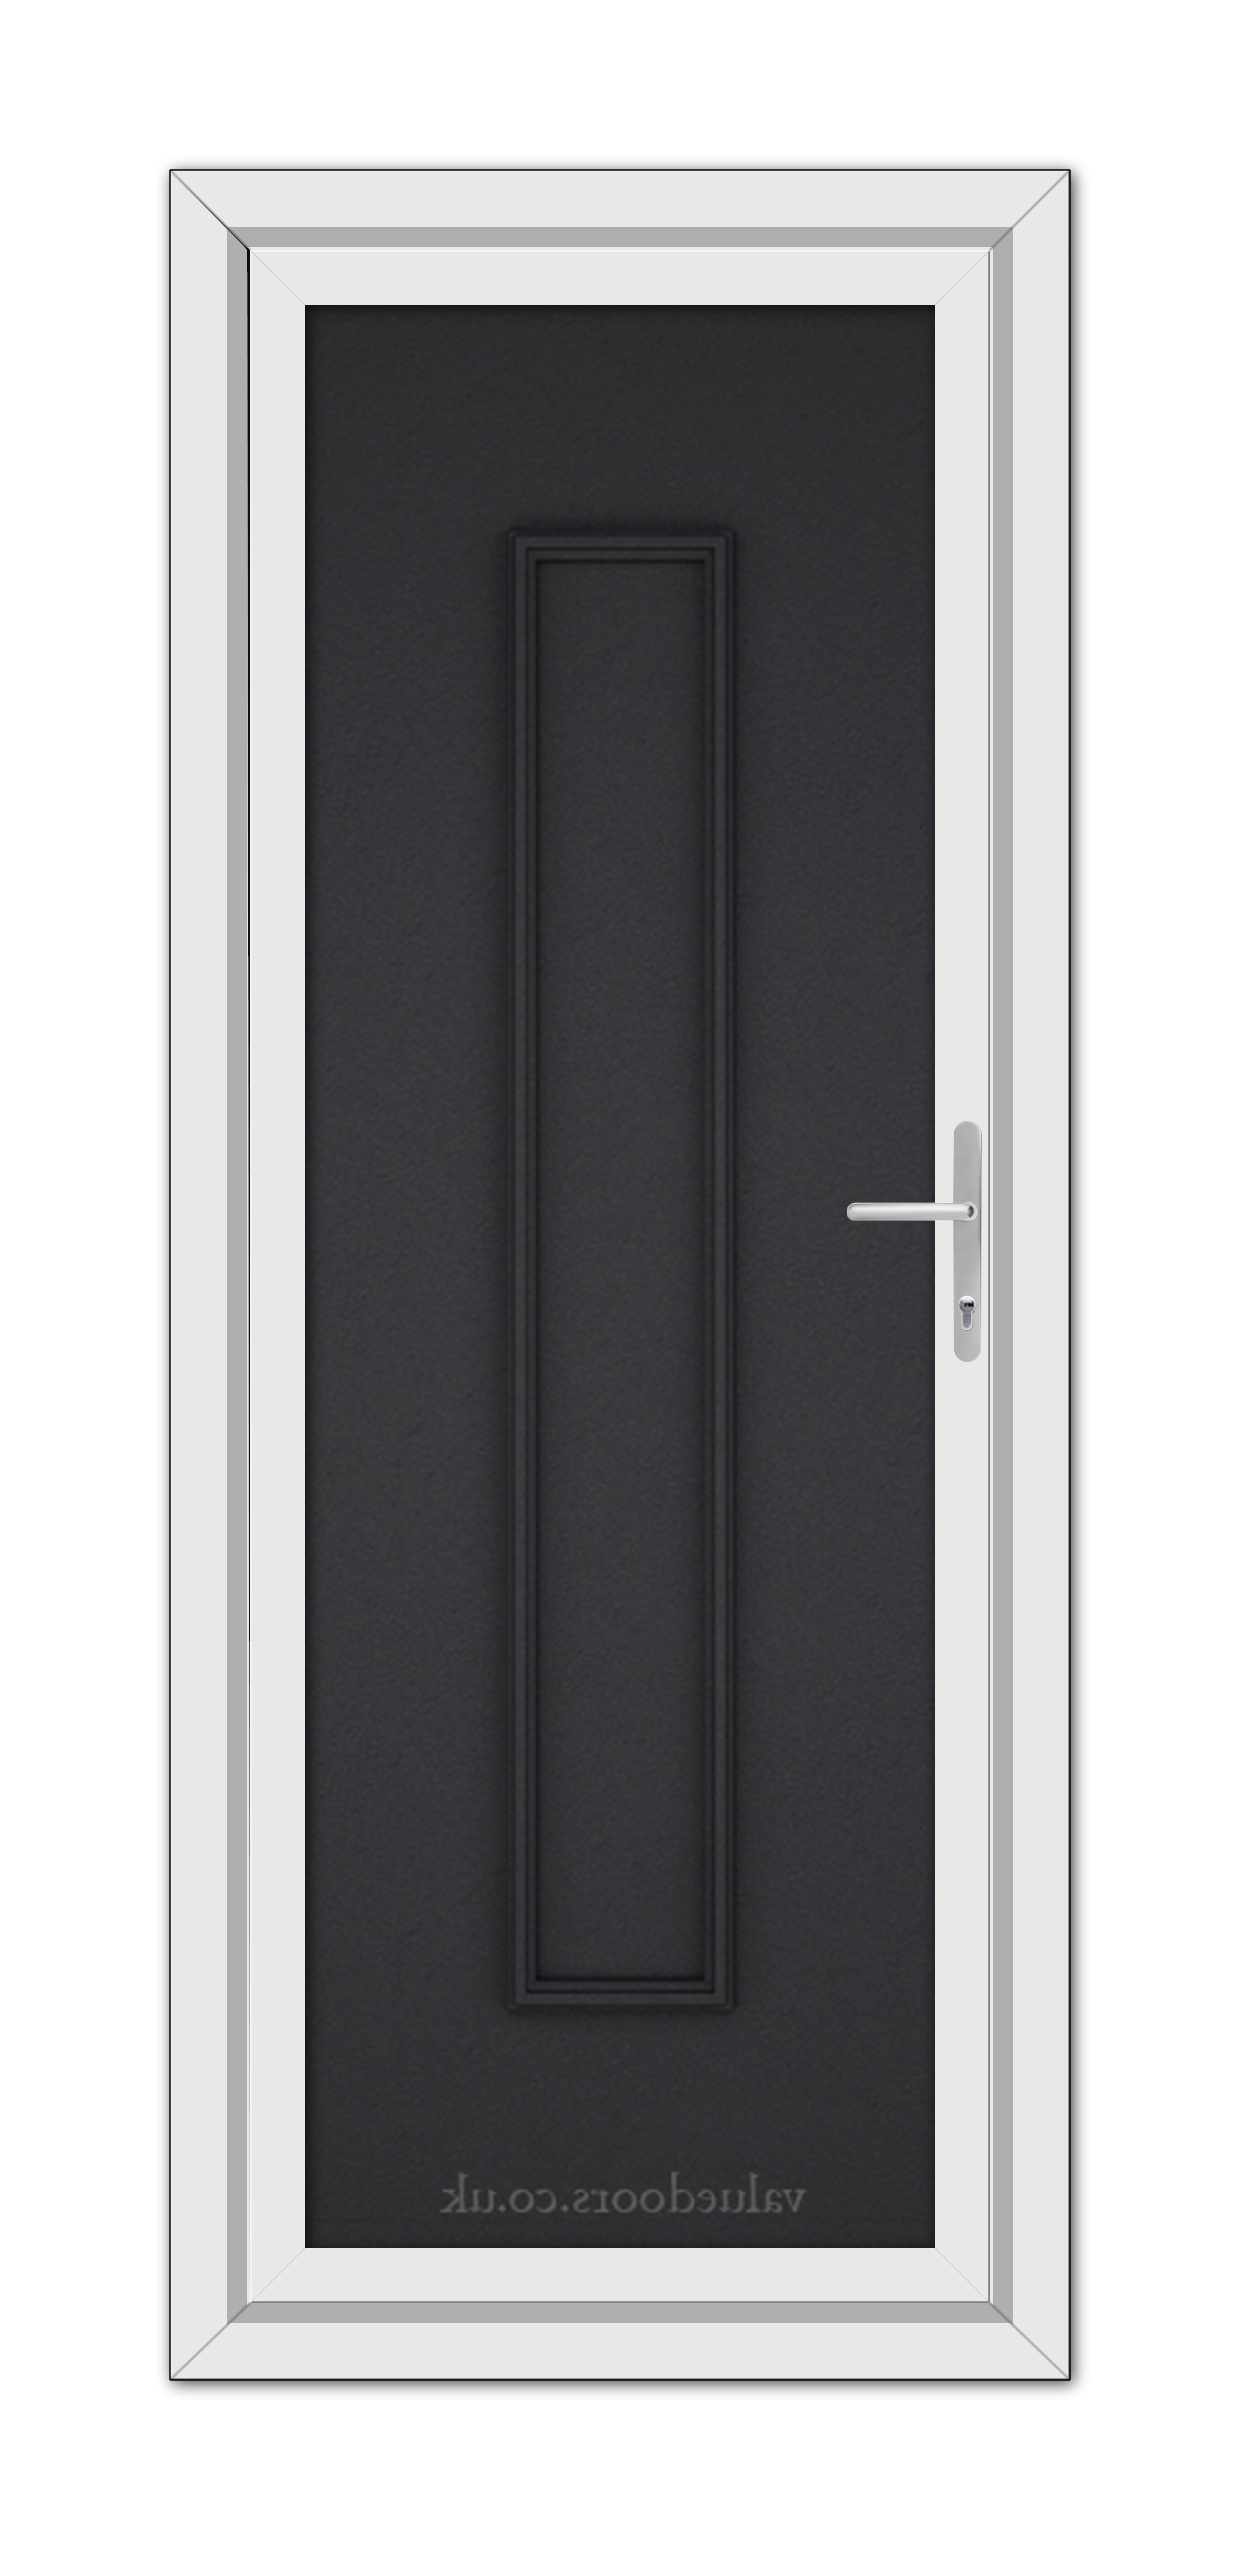 A modern Black Brown Rome Solid uPVC Door with a vertical handle, set within a white frame, viewed from the front.